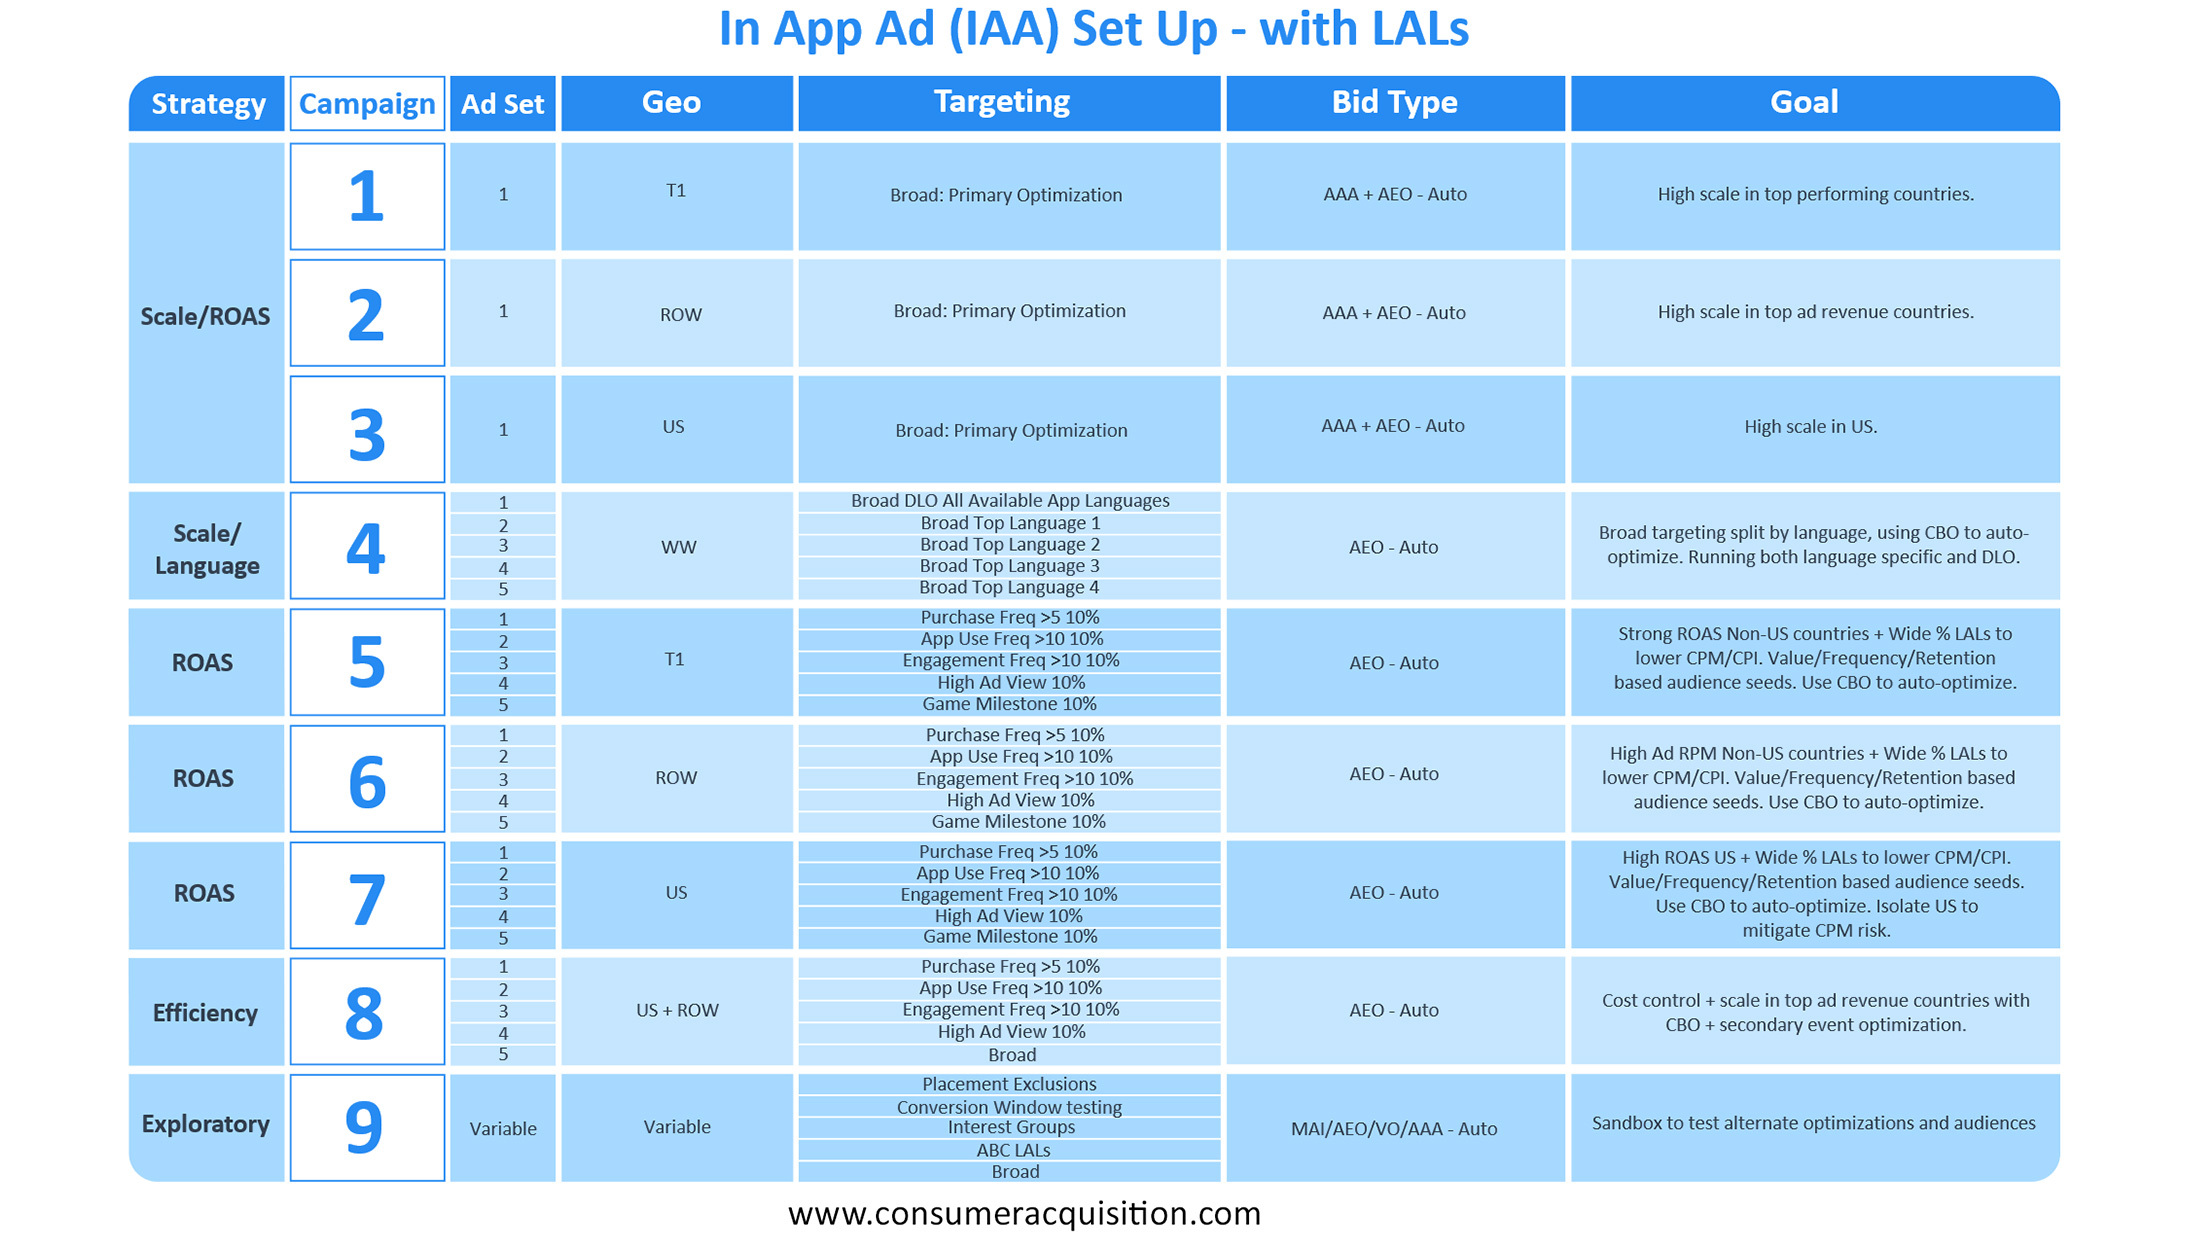 Key Actions in App Ad (IAA) Set Up - while LALs are still in effect